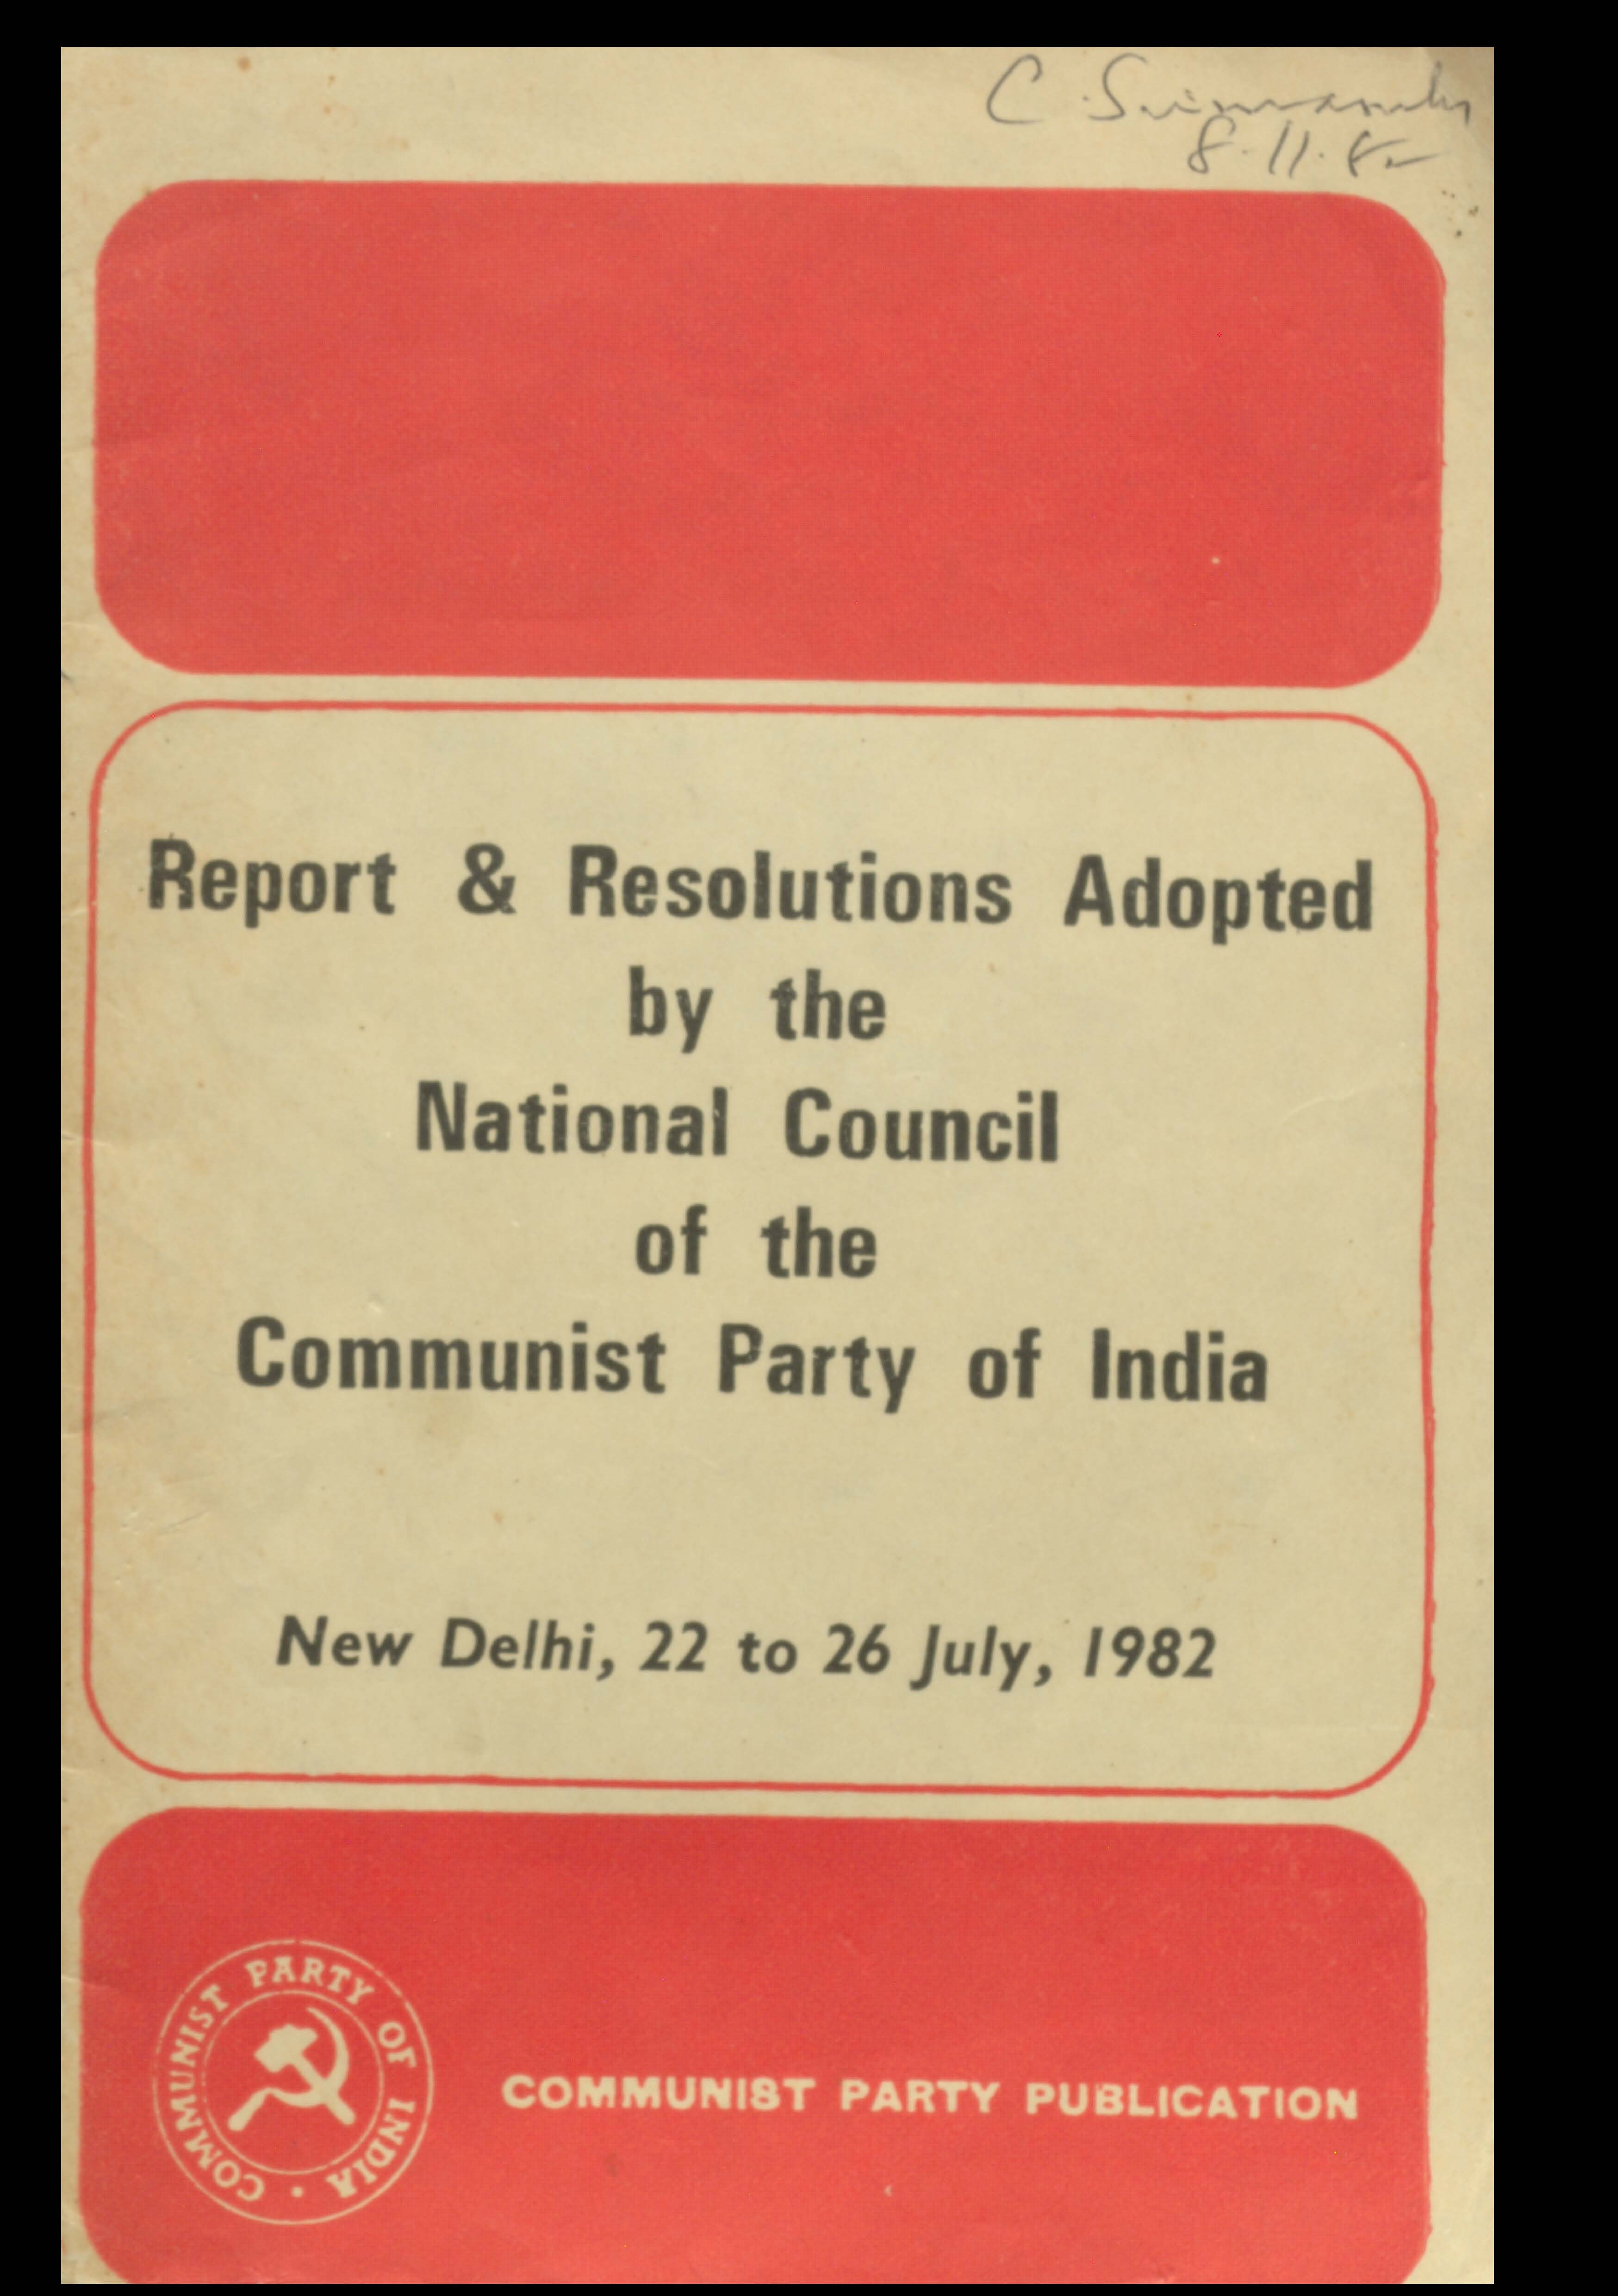 Report & Resolutions adopted by the National Council of the Communist party of India